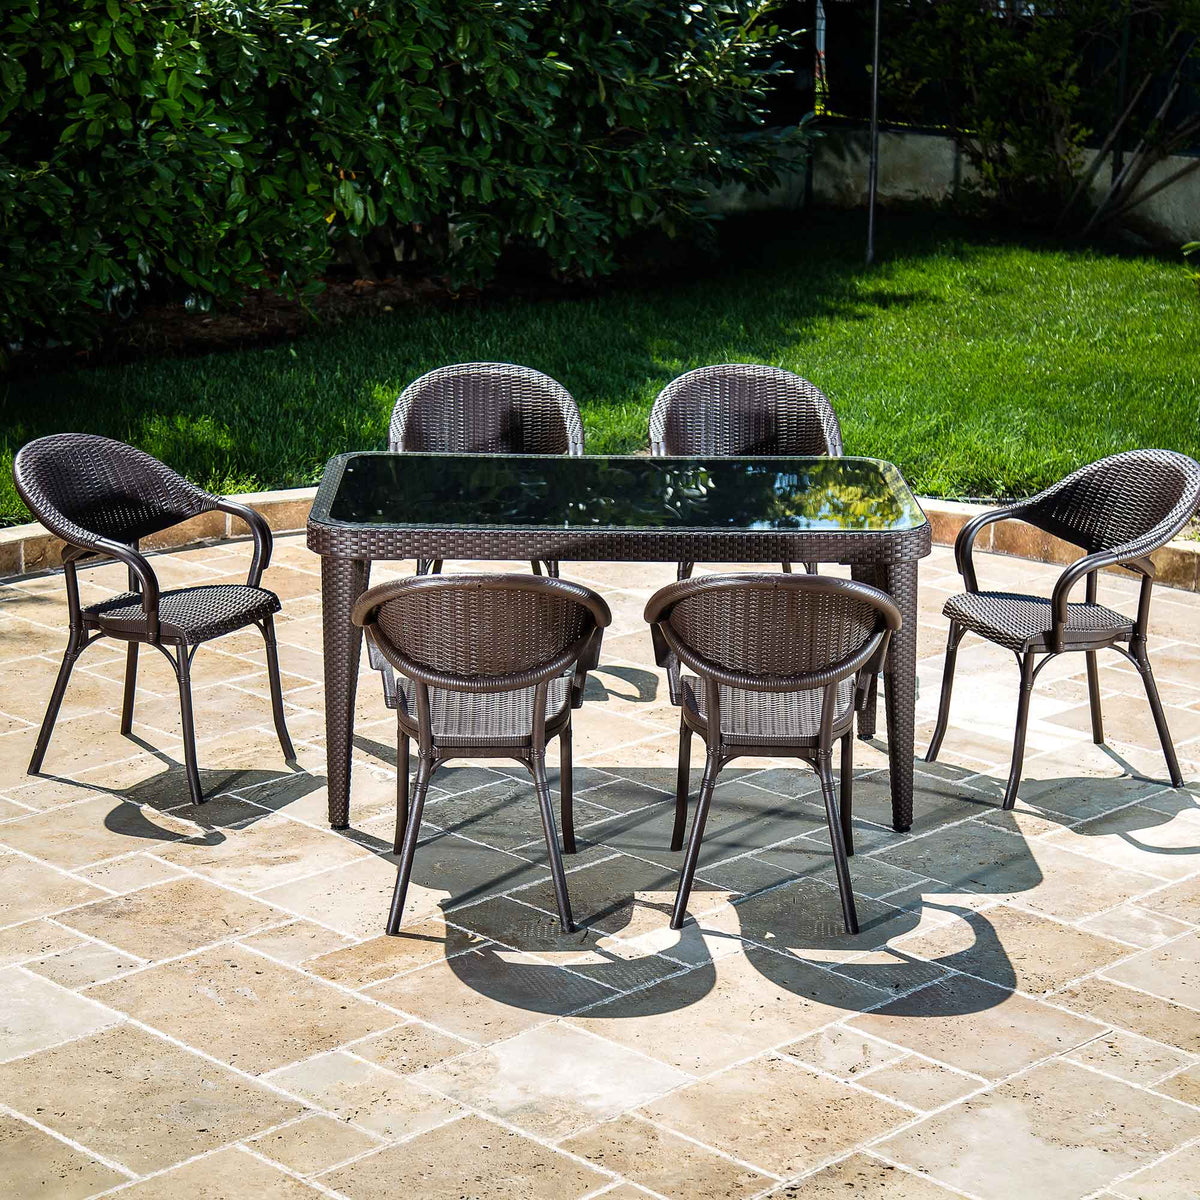 7 Piece Dining Set with Weather Resistant PP/Fibreglass, Glass Top